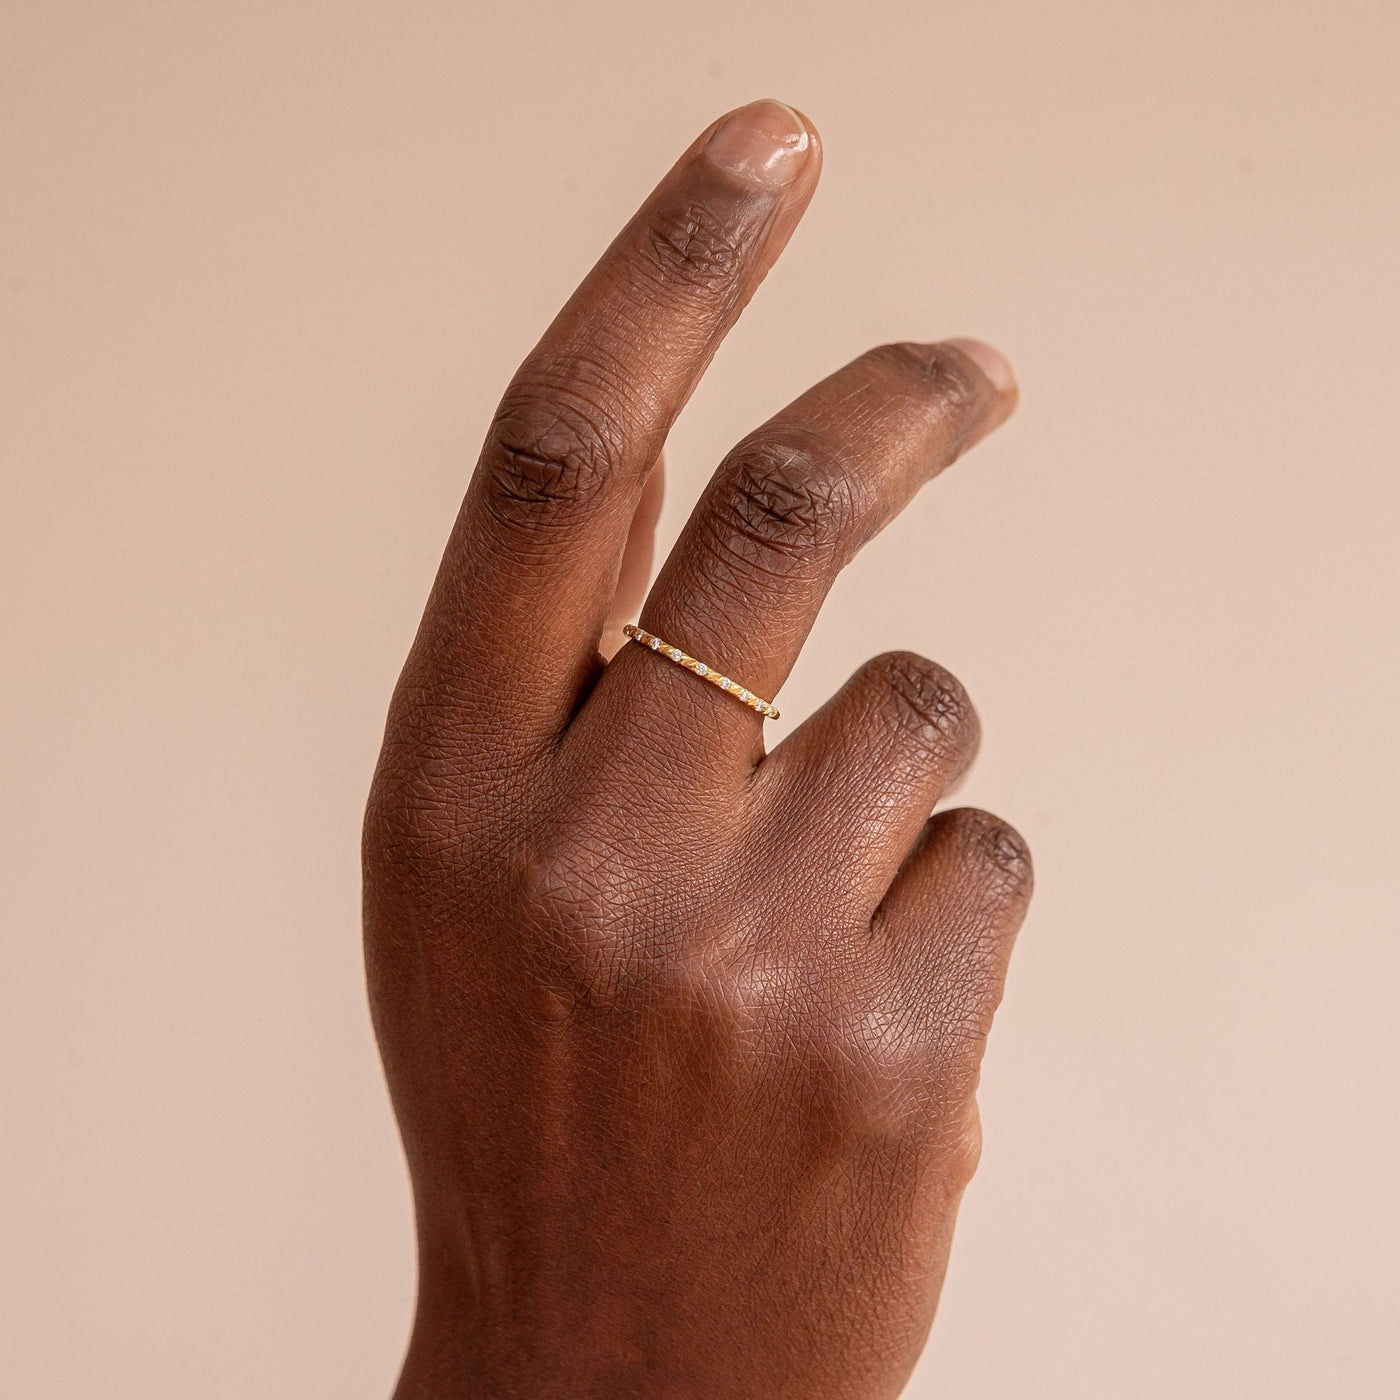 Daisy Ring Juna Fae sustainable conscious jewelry 18k recycled gold lab grown diamonds classic with a twist stack